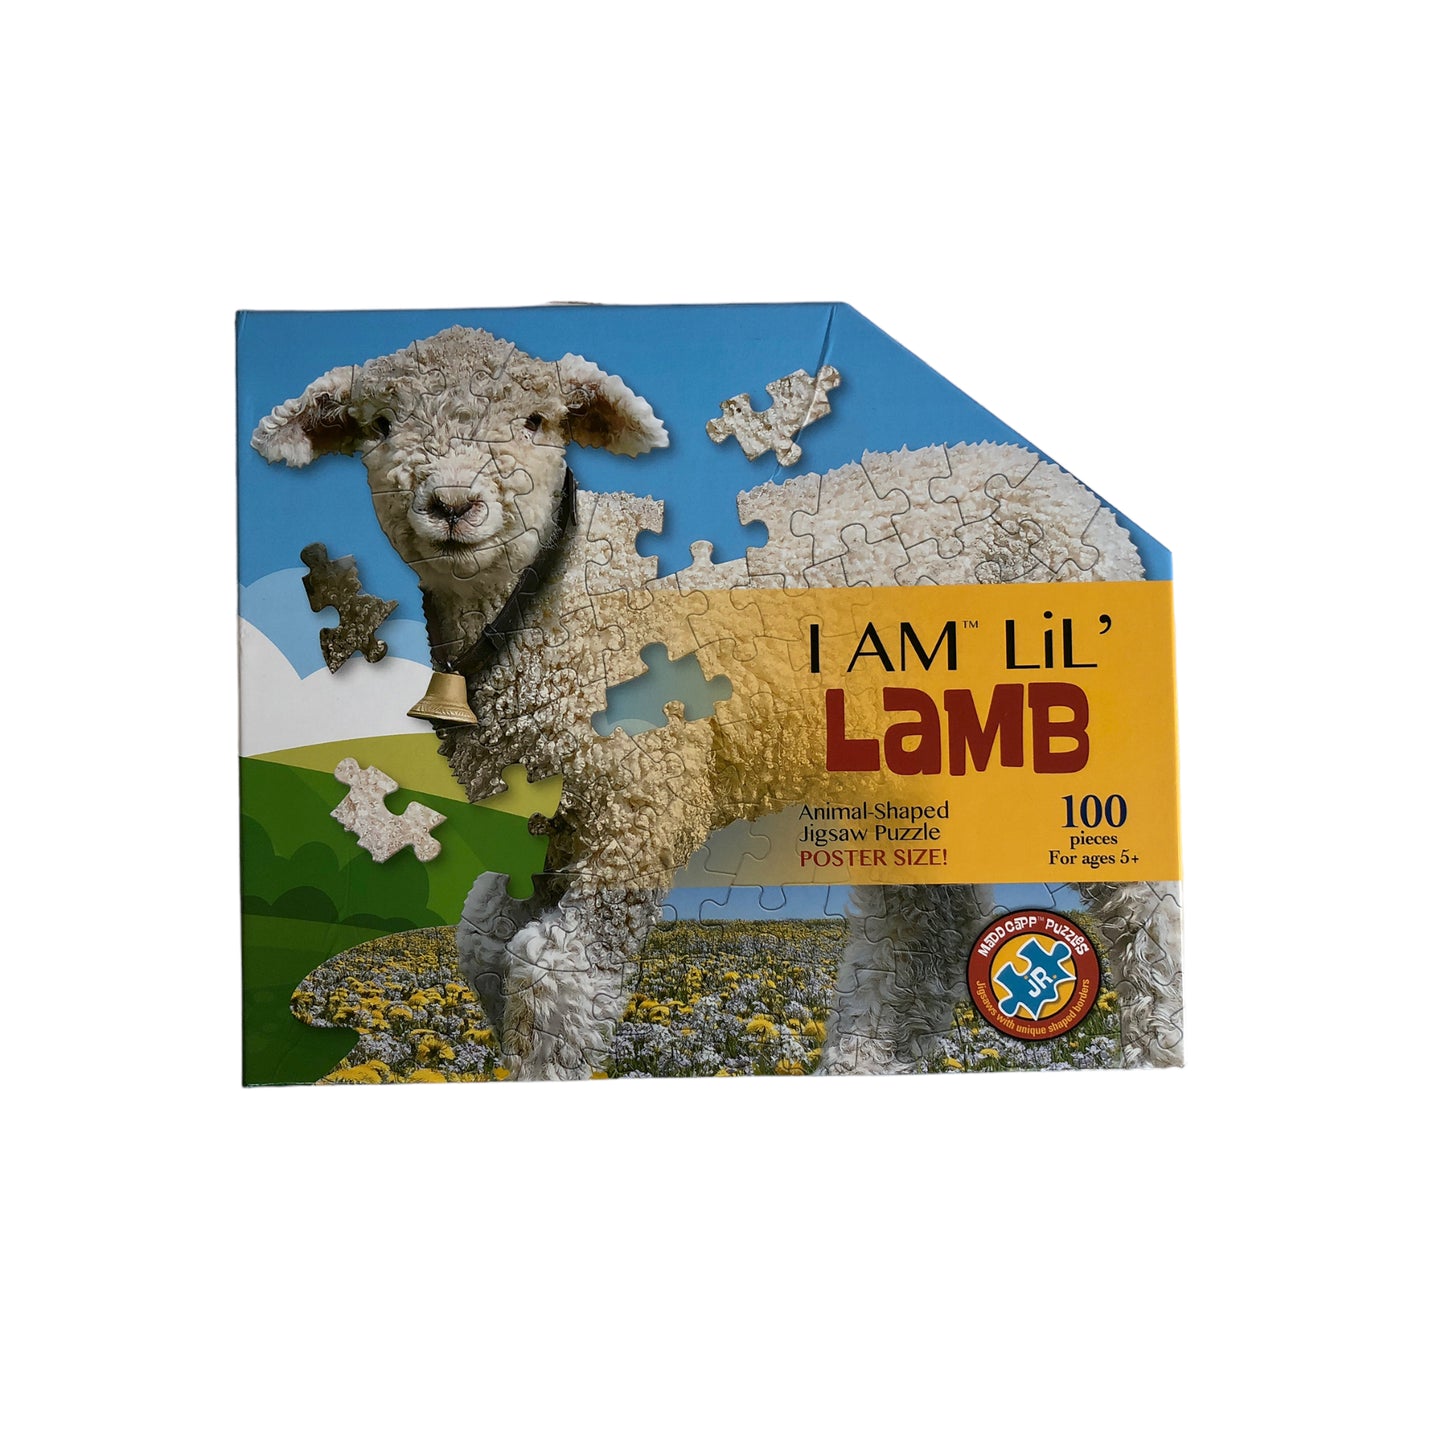 I am Lil' Lamb - Animal Shaped Jigsaw Puzzle - 100 pieces